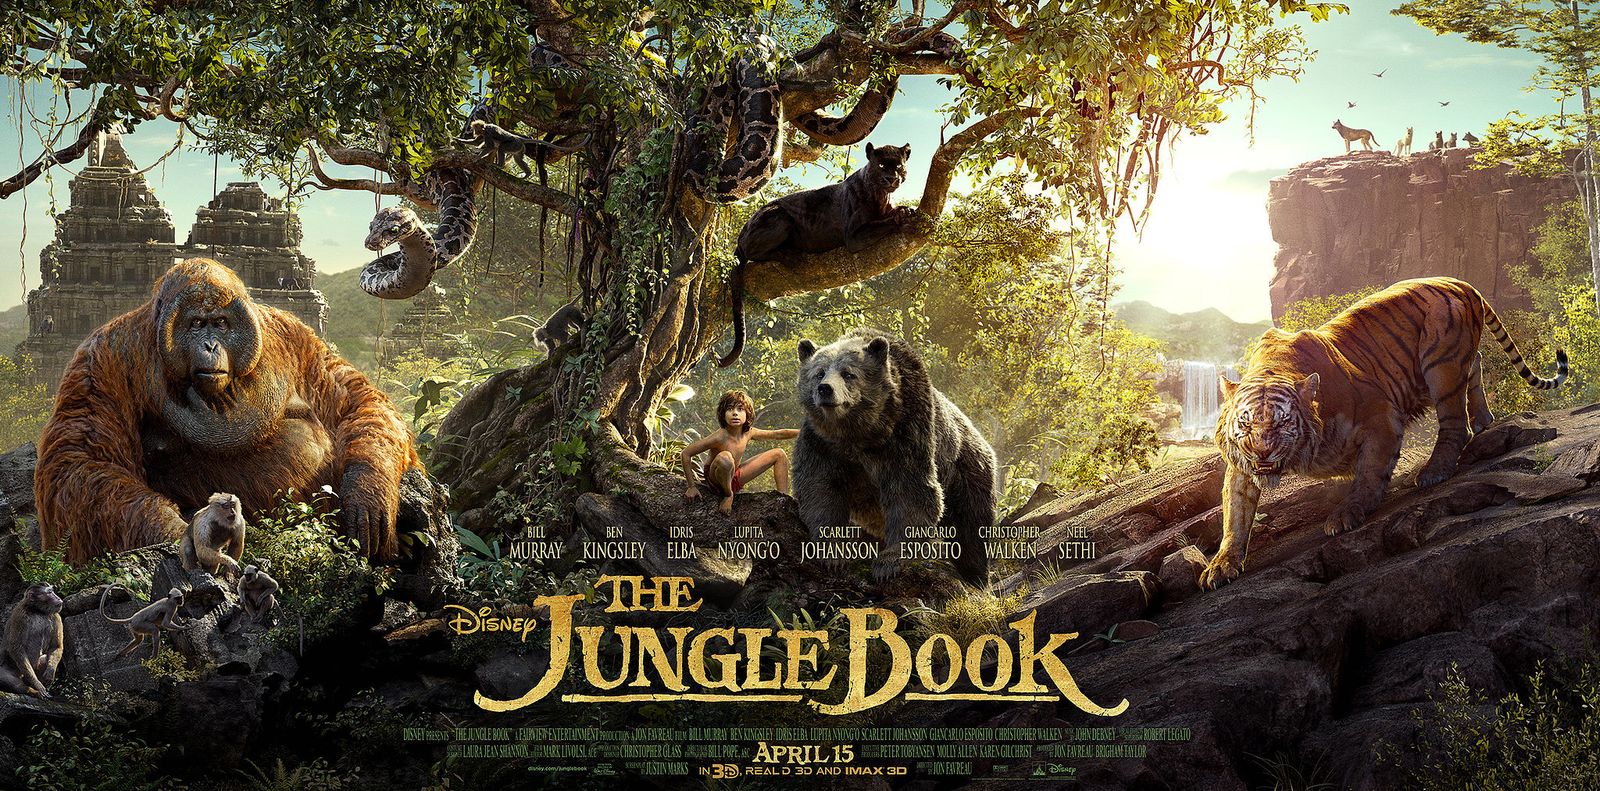 The Jungle Book Dominates The Weekend Box Office Again